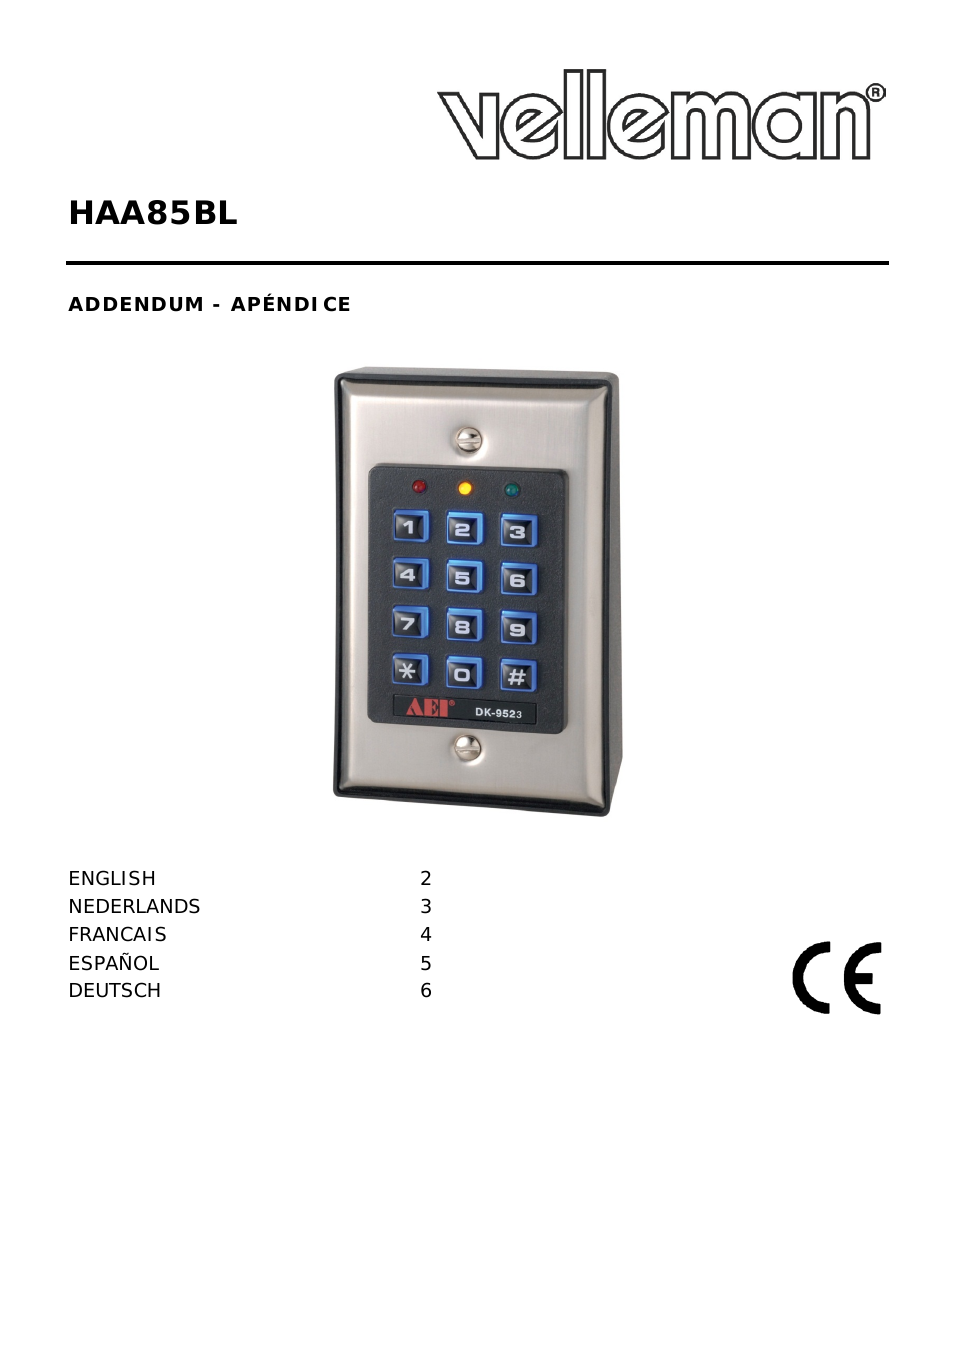 HAA85BL Setting Master Code and User Code